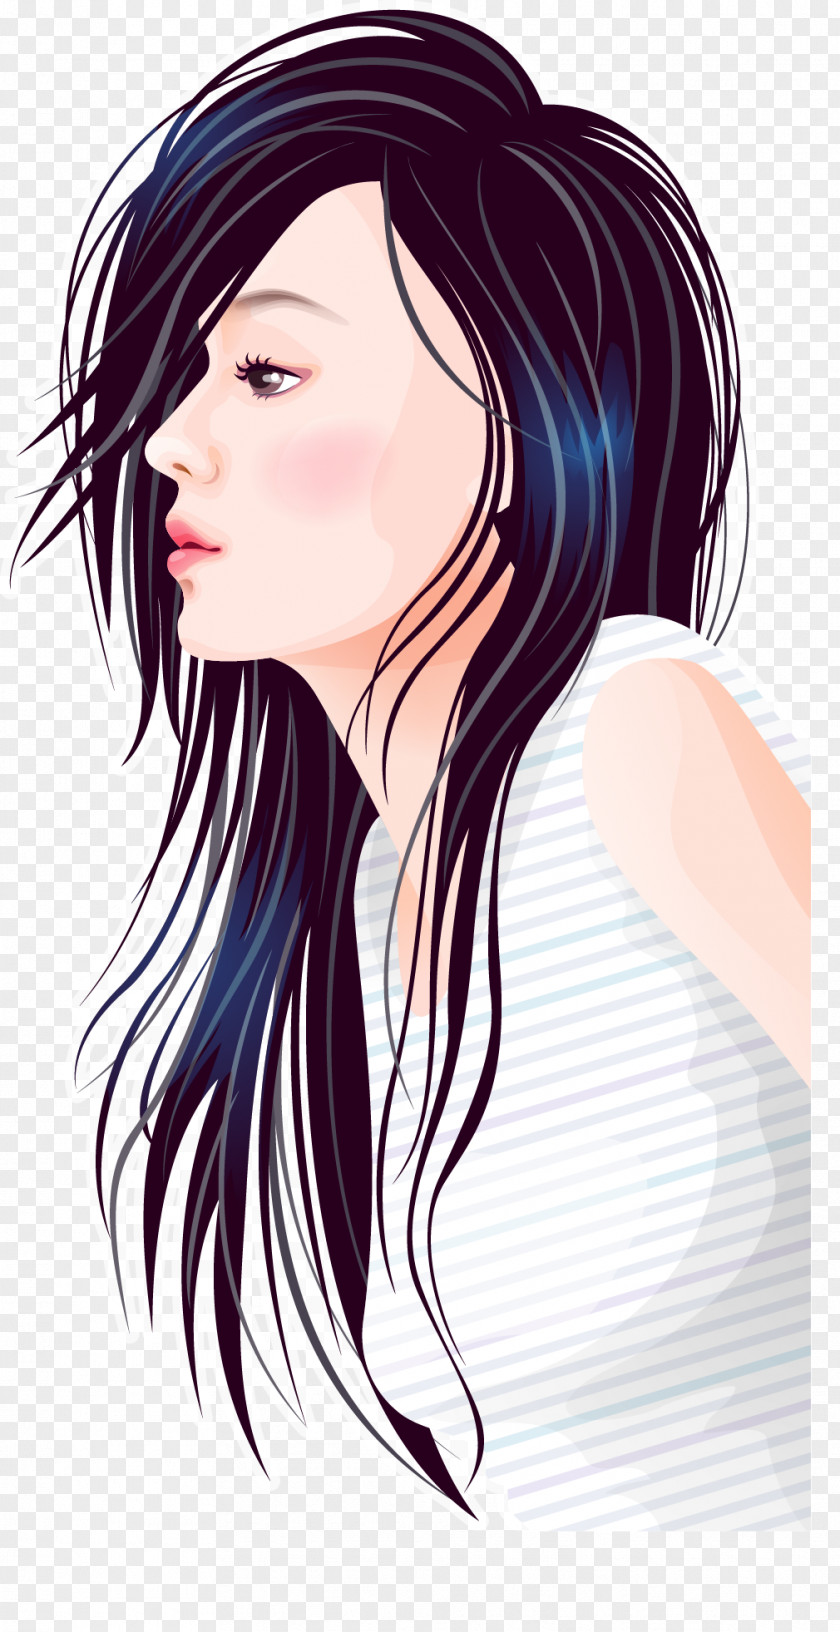 Face Avatar Woman Illustration PNG Illustration, Cool girl clipart PNG